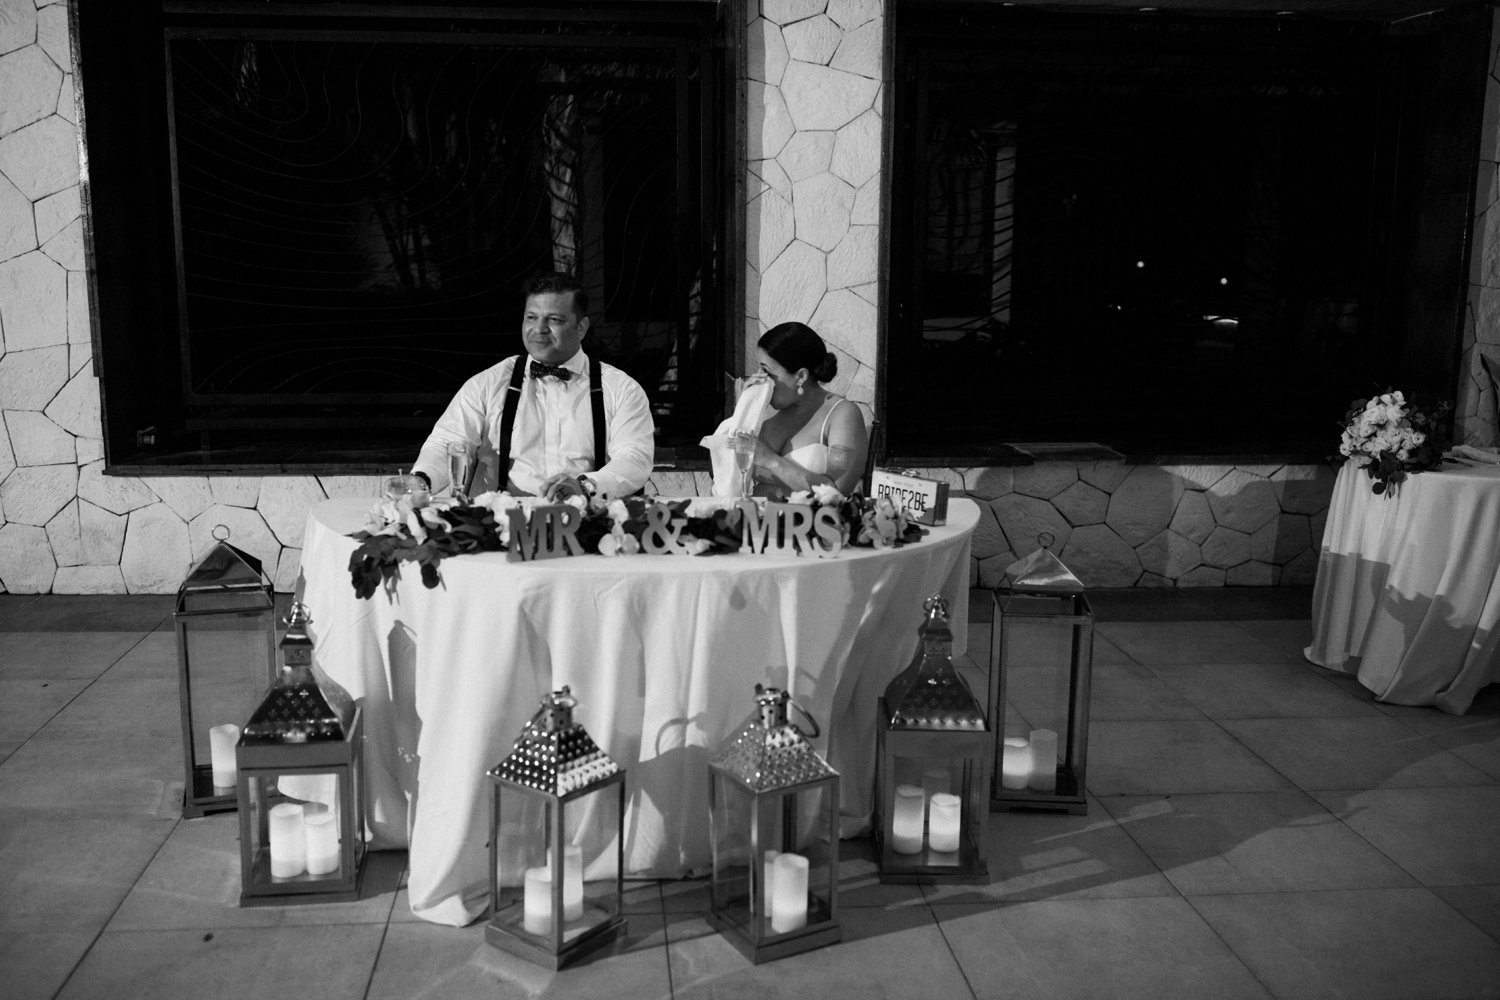  images by feliciathephotographer.com | destination wedding photographer | mexico | tropical | fiji | venue | azul beach resort | riviera maya | reception | speeches | bride and groom | head table | tearing up | mr and mrs | candles | black and white | 